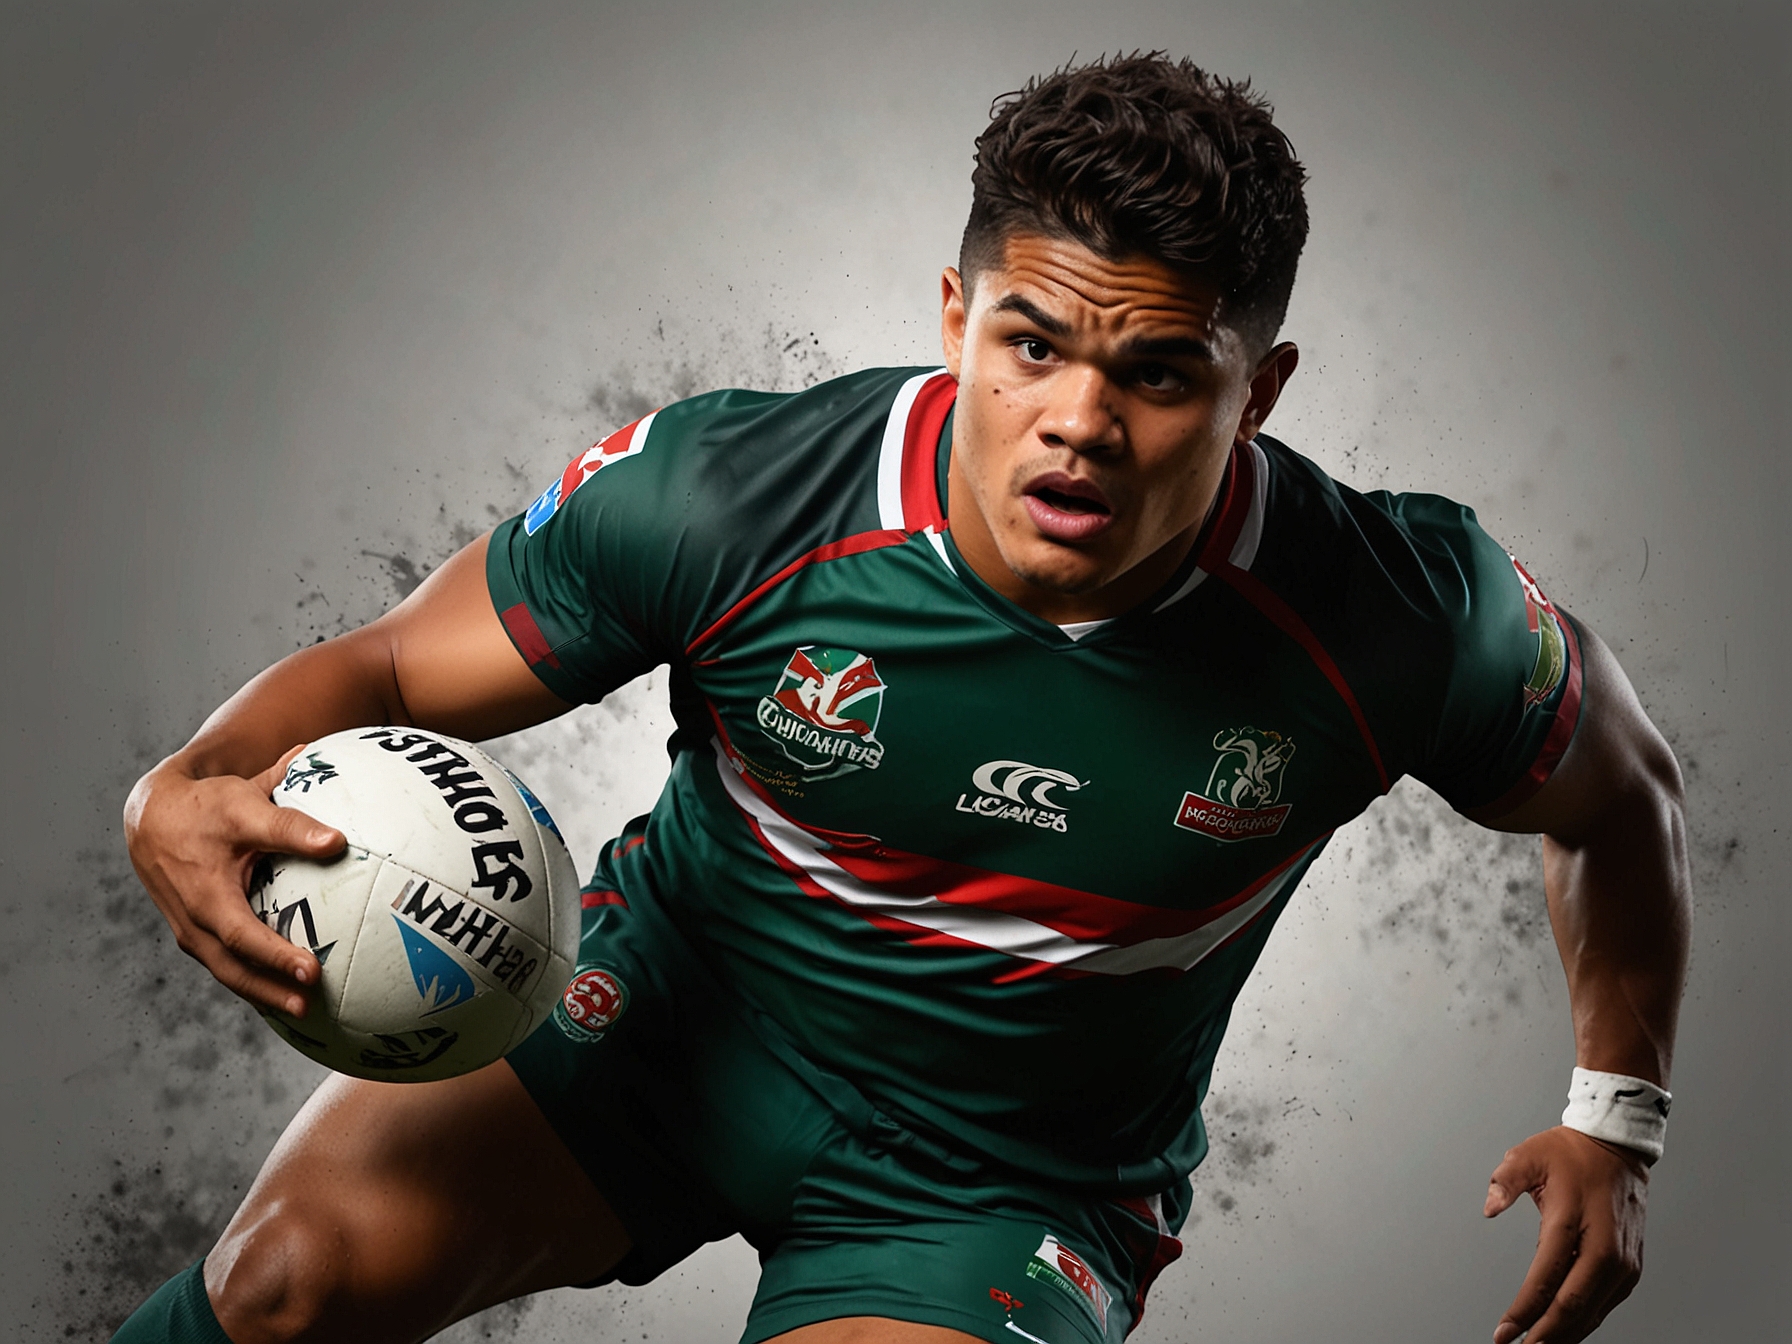 Latrell Mitchell in action as a fullback for South Sydney Rabbitohs, showcasing his agility and game-reading capabilities while orchestrating plays and creating scoring opportunities.